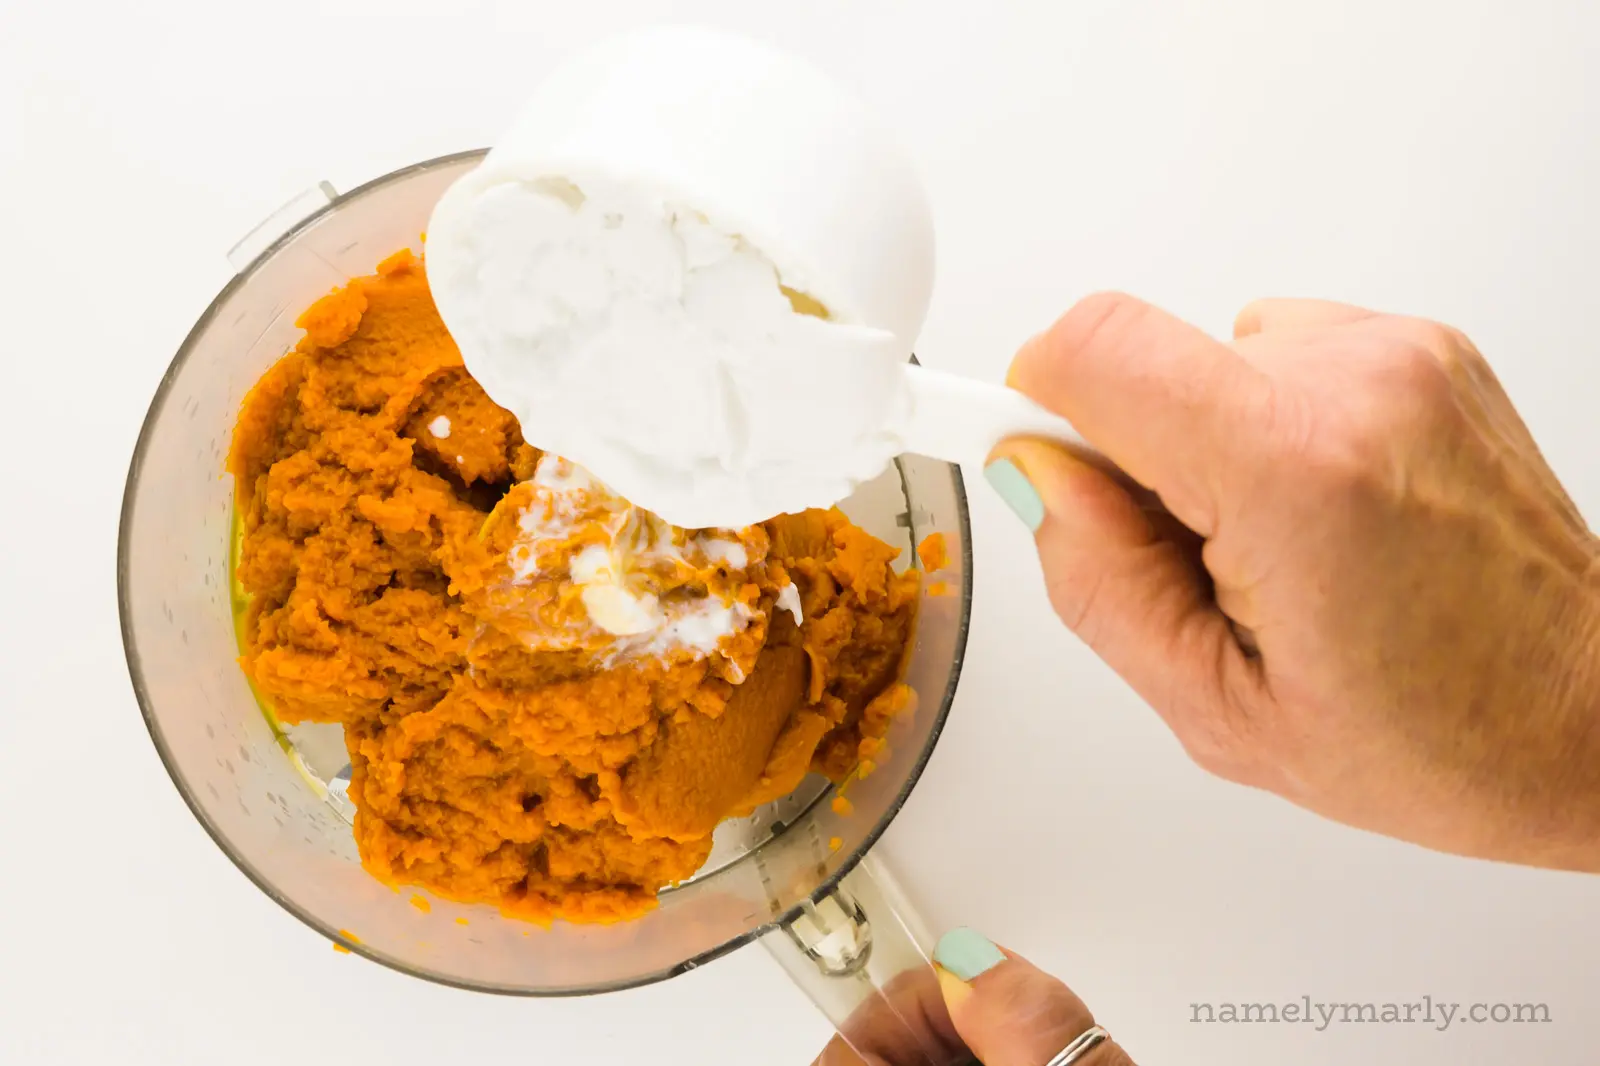 Coconut milk is being poured into a food processor bowl full of pumpkin puree.